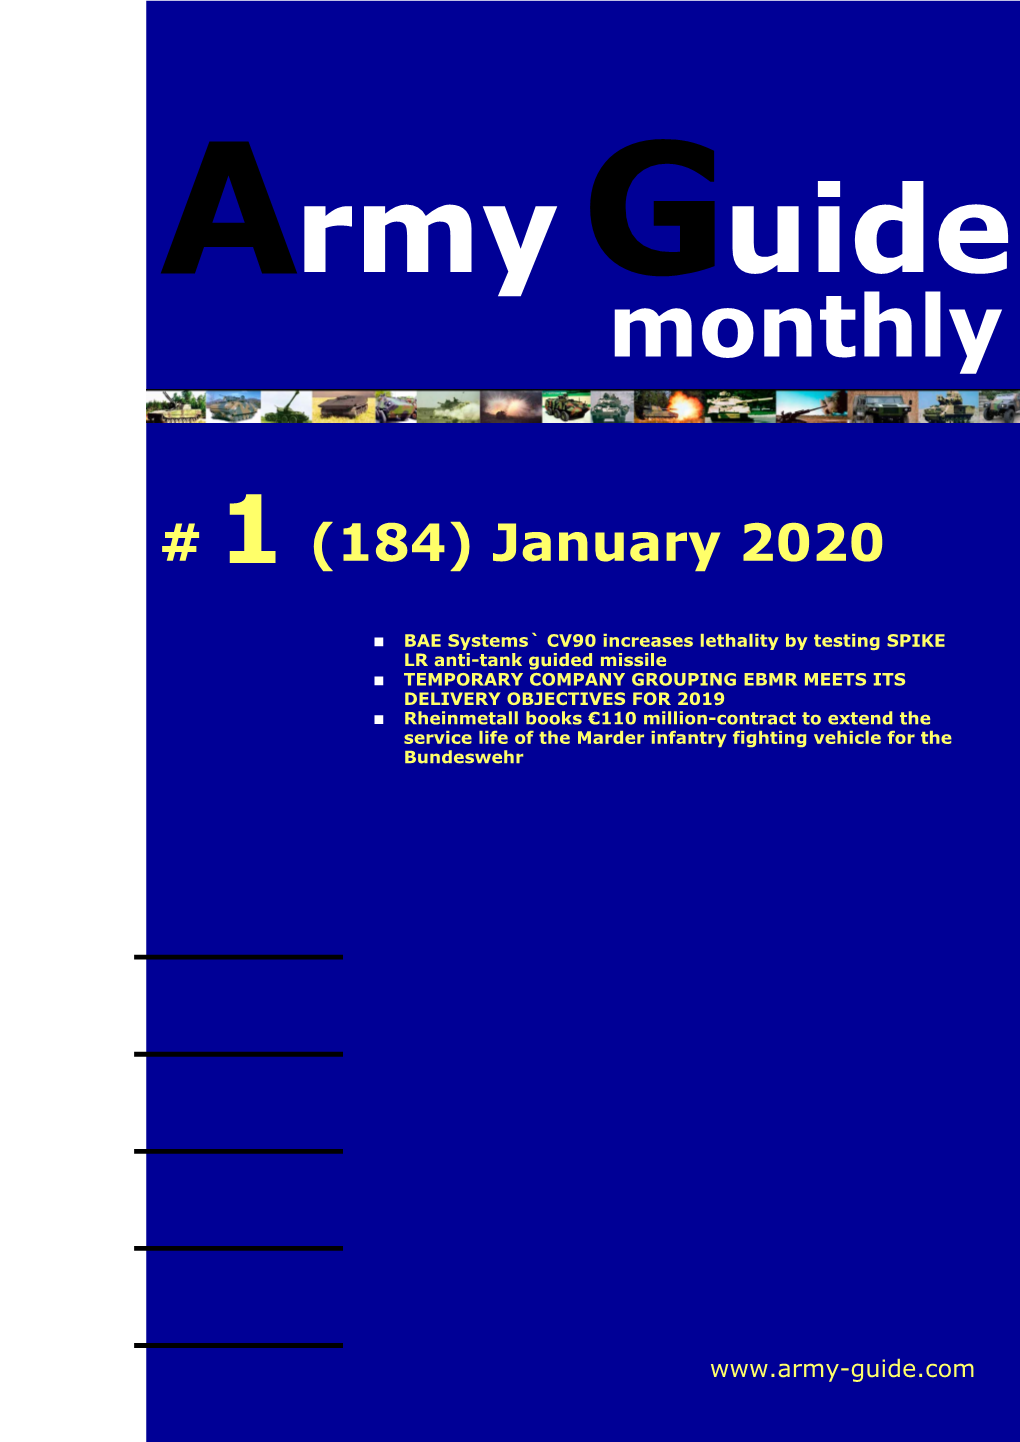 Army Guide Monthly • Issue #1 (184) • January 2020